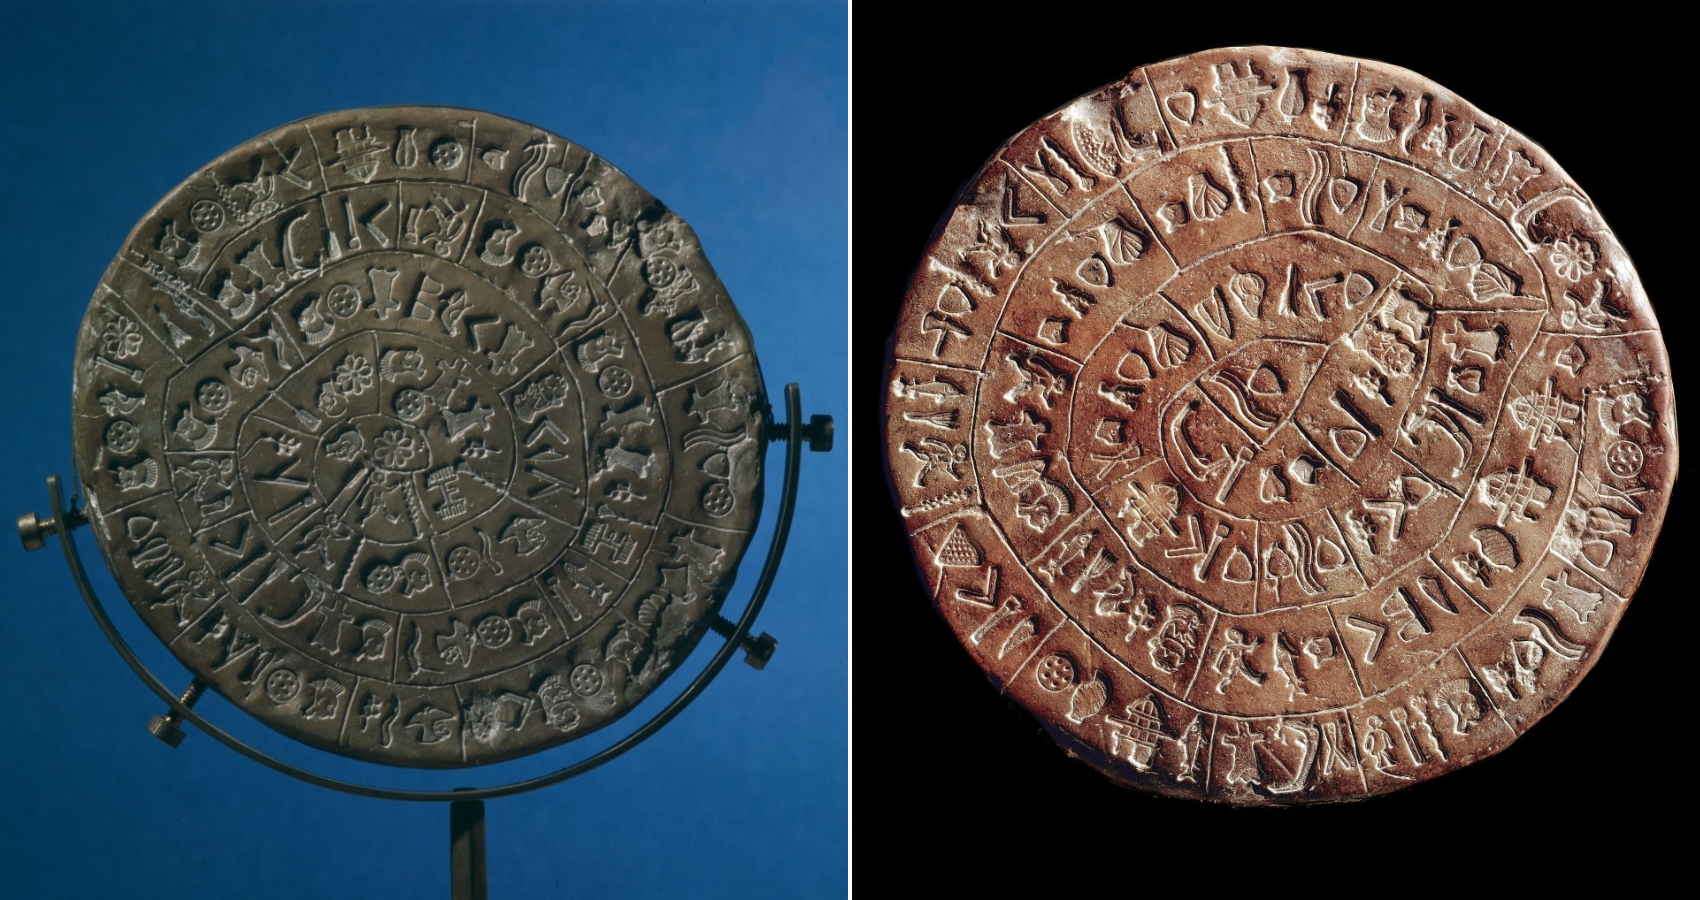 Mysterious Ancient Greek ‘Phaistos Disc’ in LOST language finally decoded to reveal sᴇxʏ sᴇᴄʀᴇᴛ